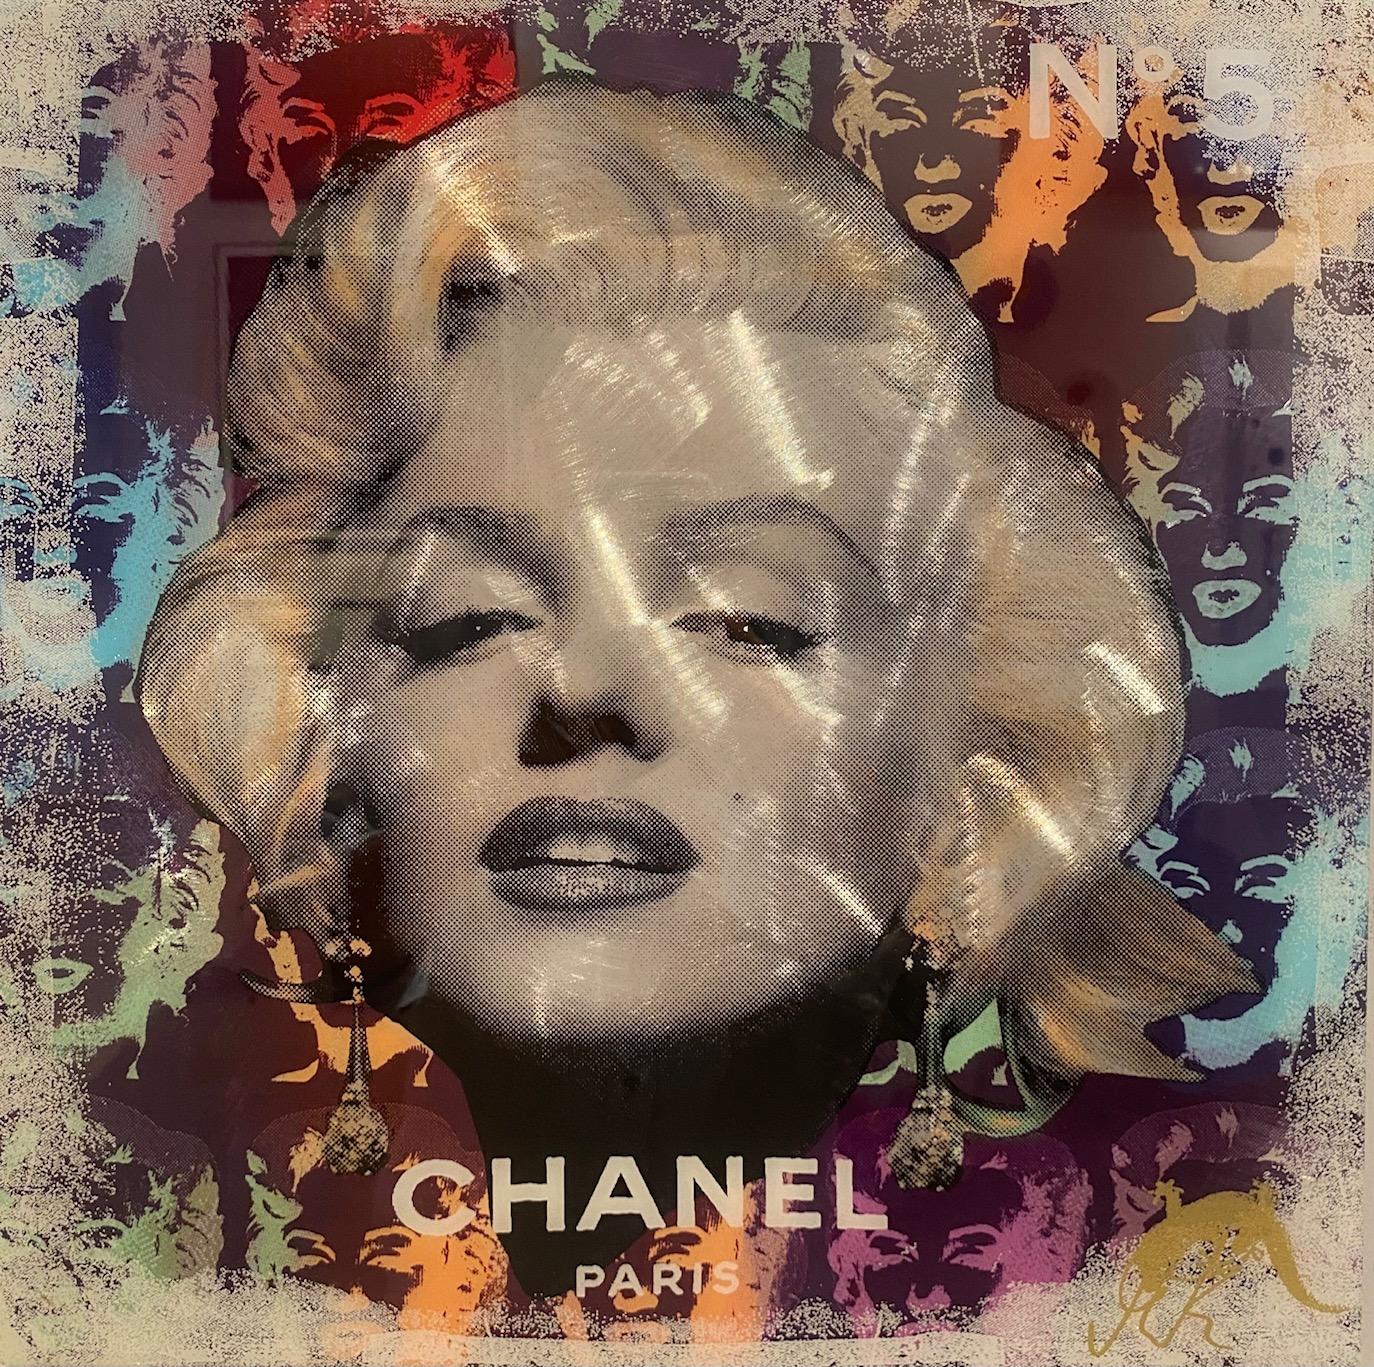 Chanel No 5 pop art style, Claire Wade